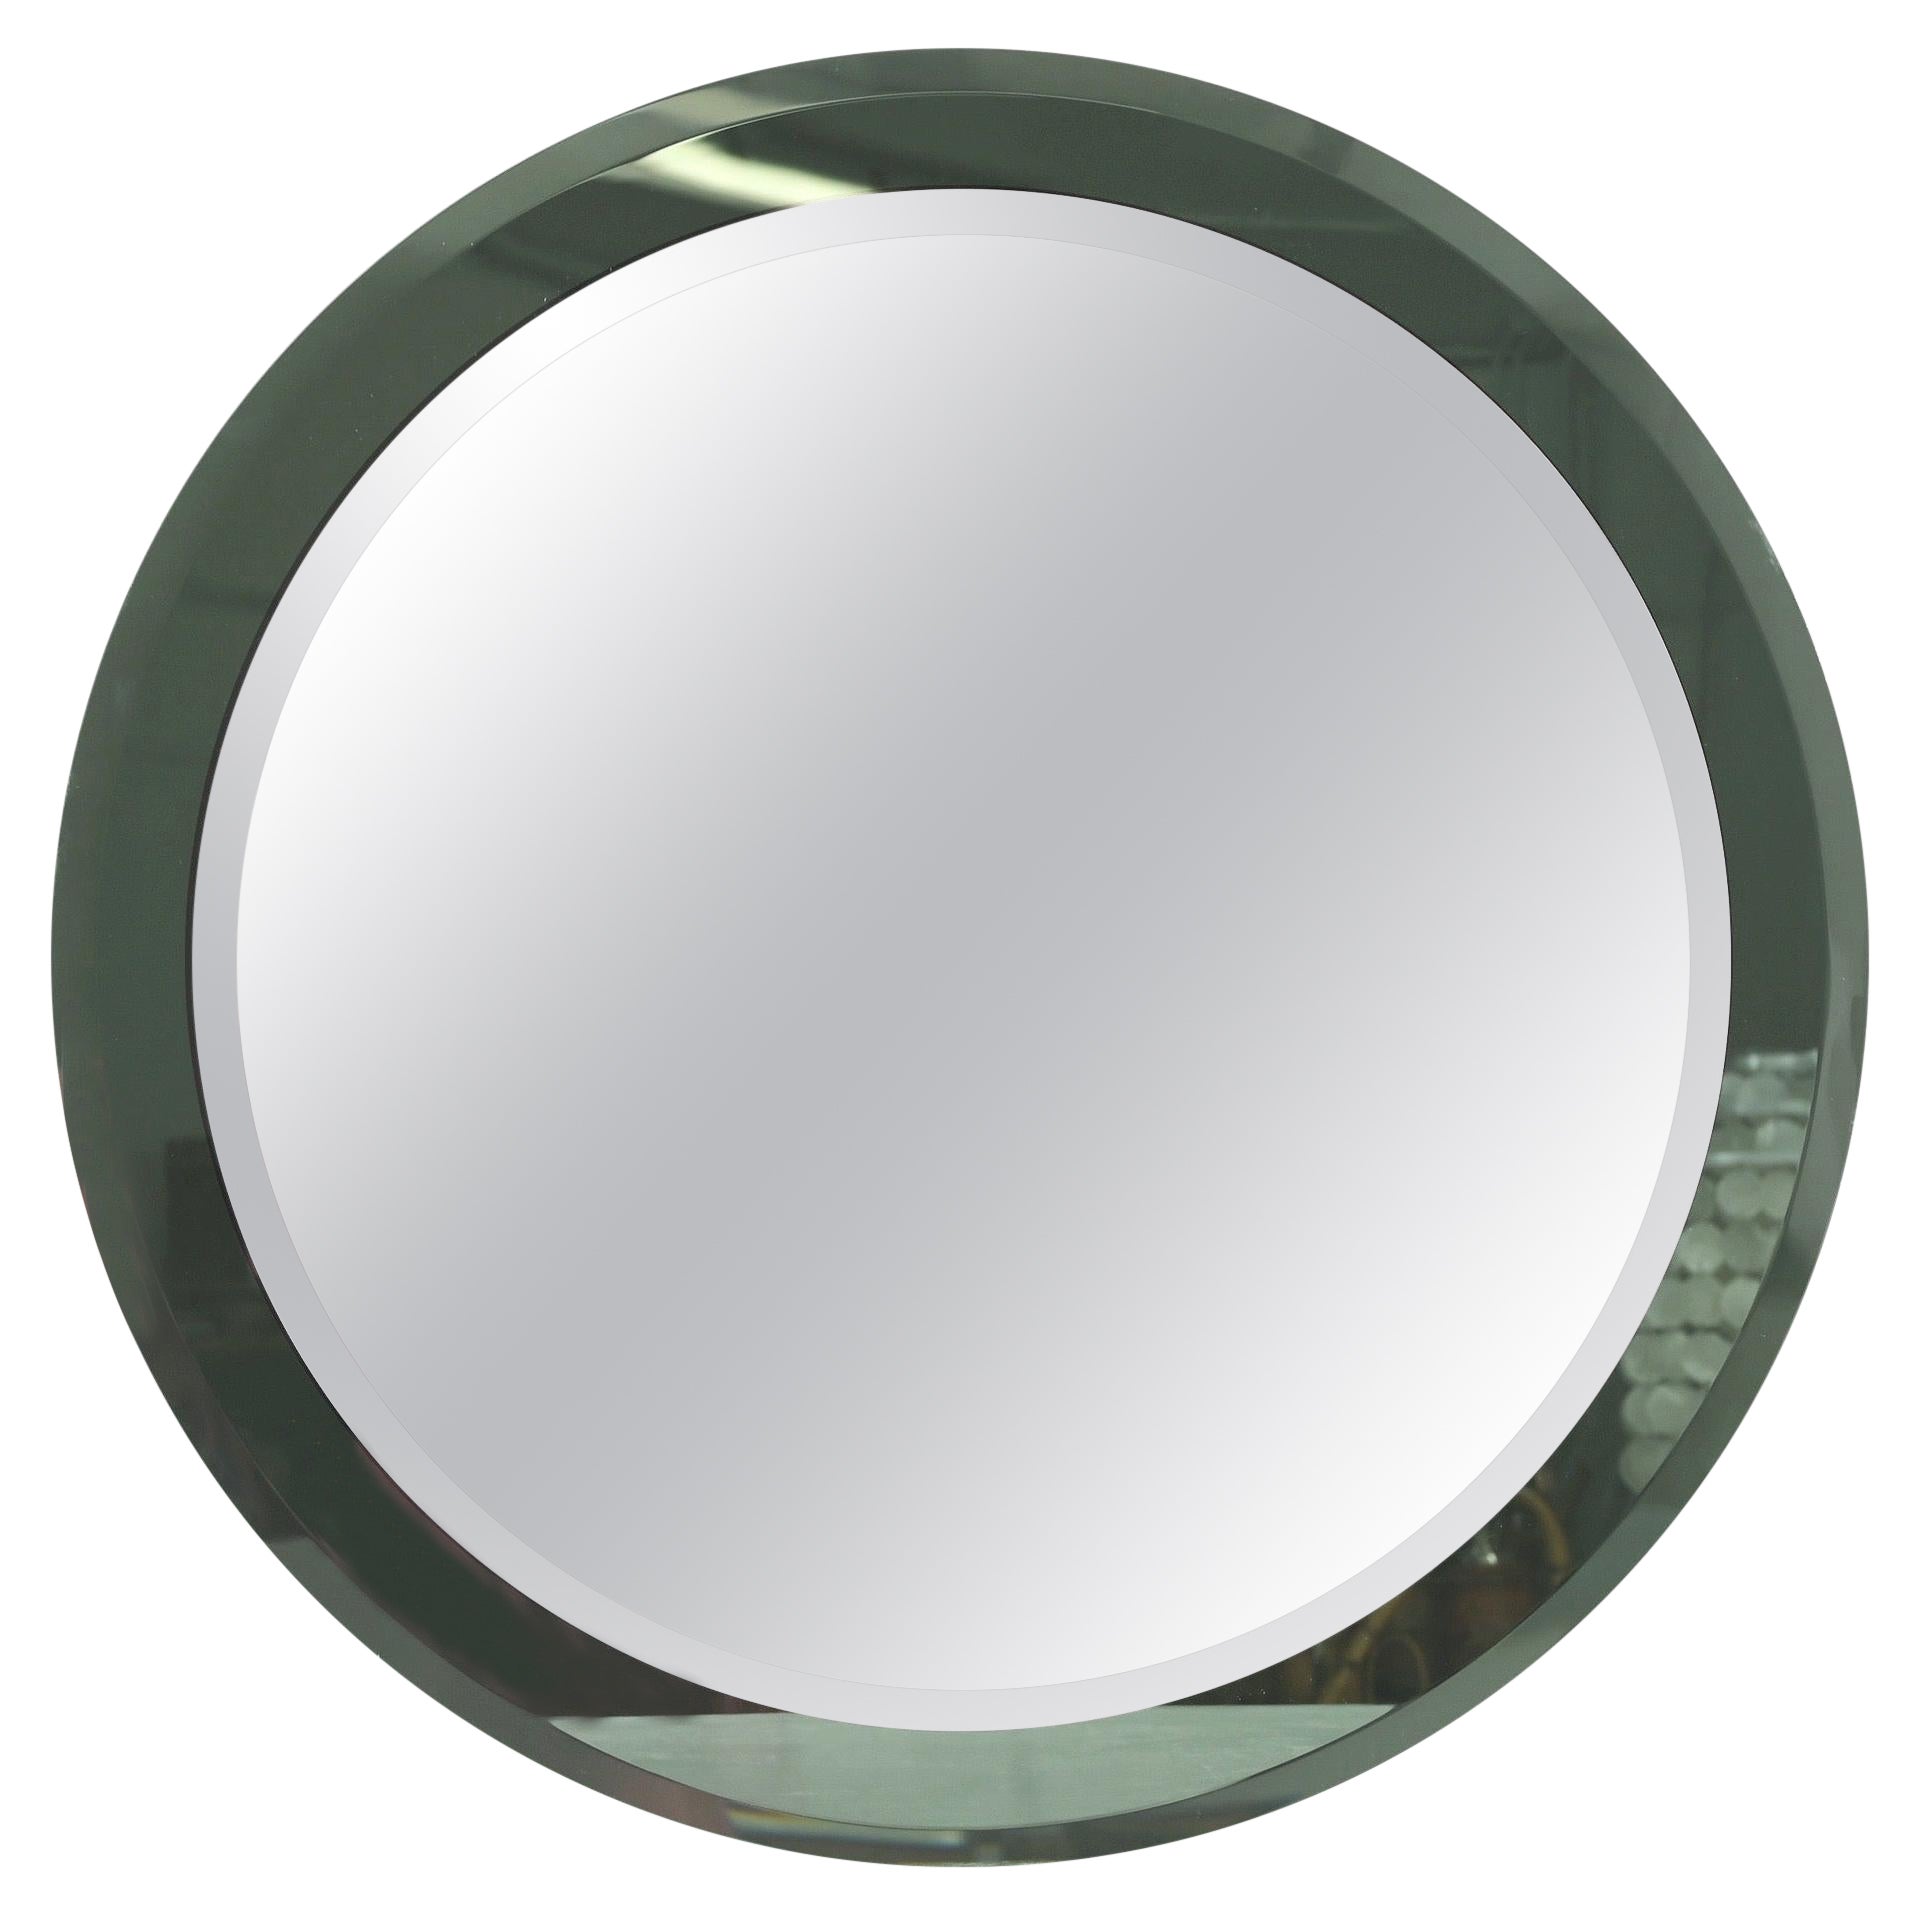 Mid-Century Olive Green Double Beveled Round Mirror, by Metalvetro, Italy, 1970s For Sale